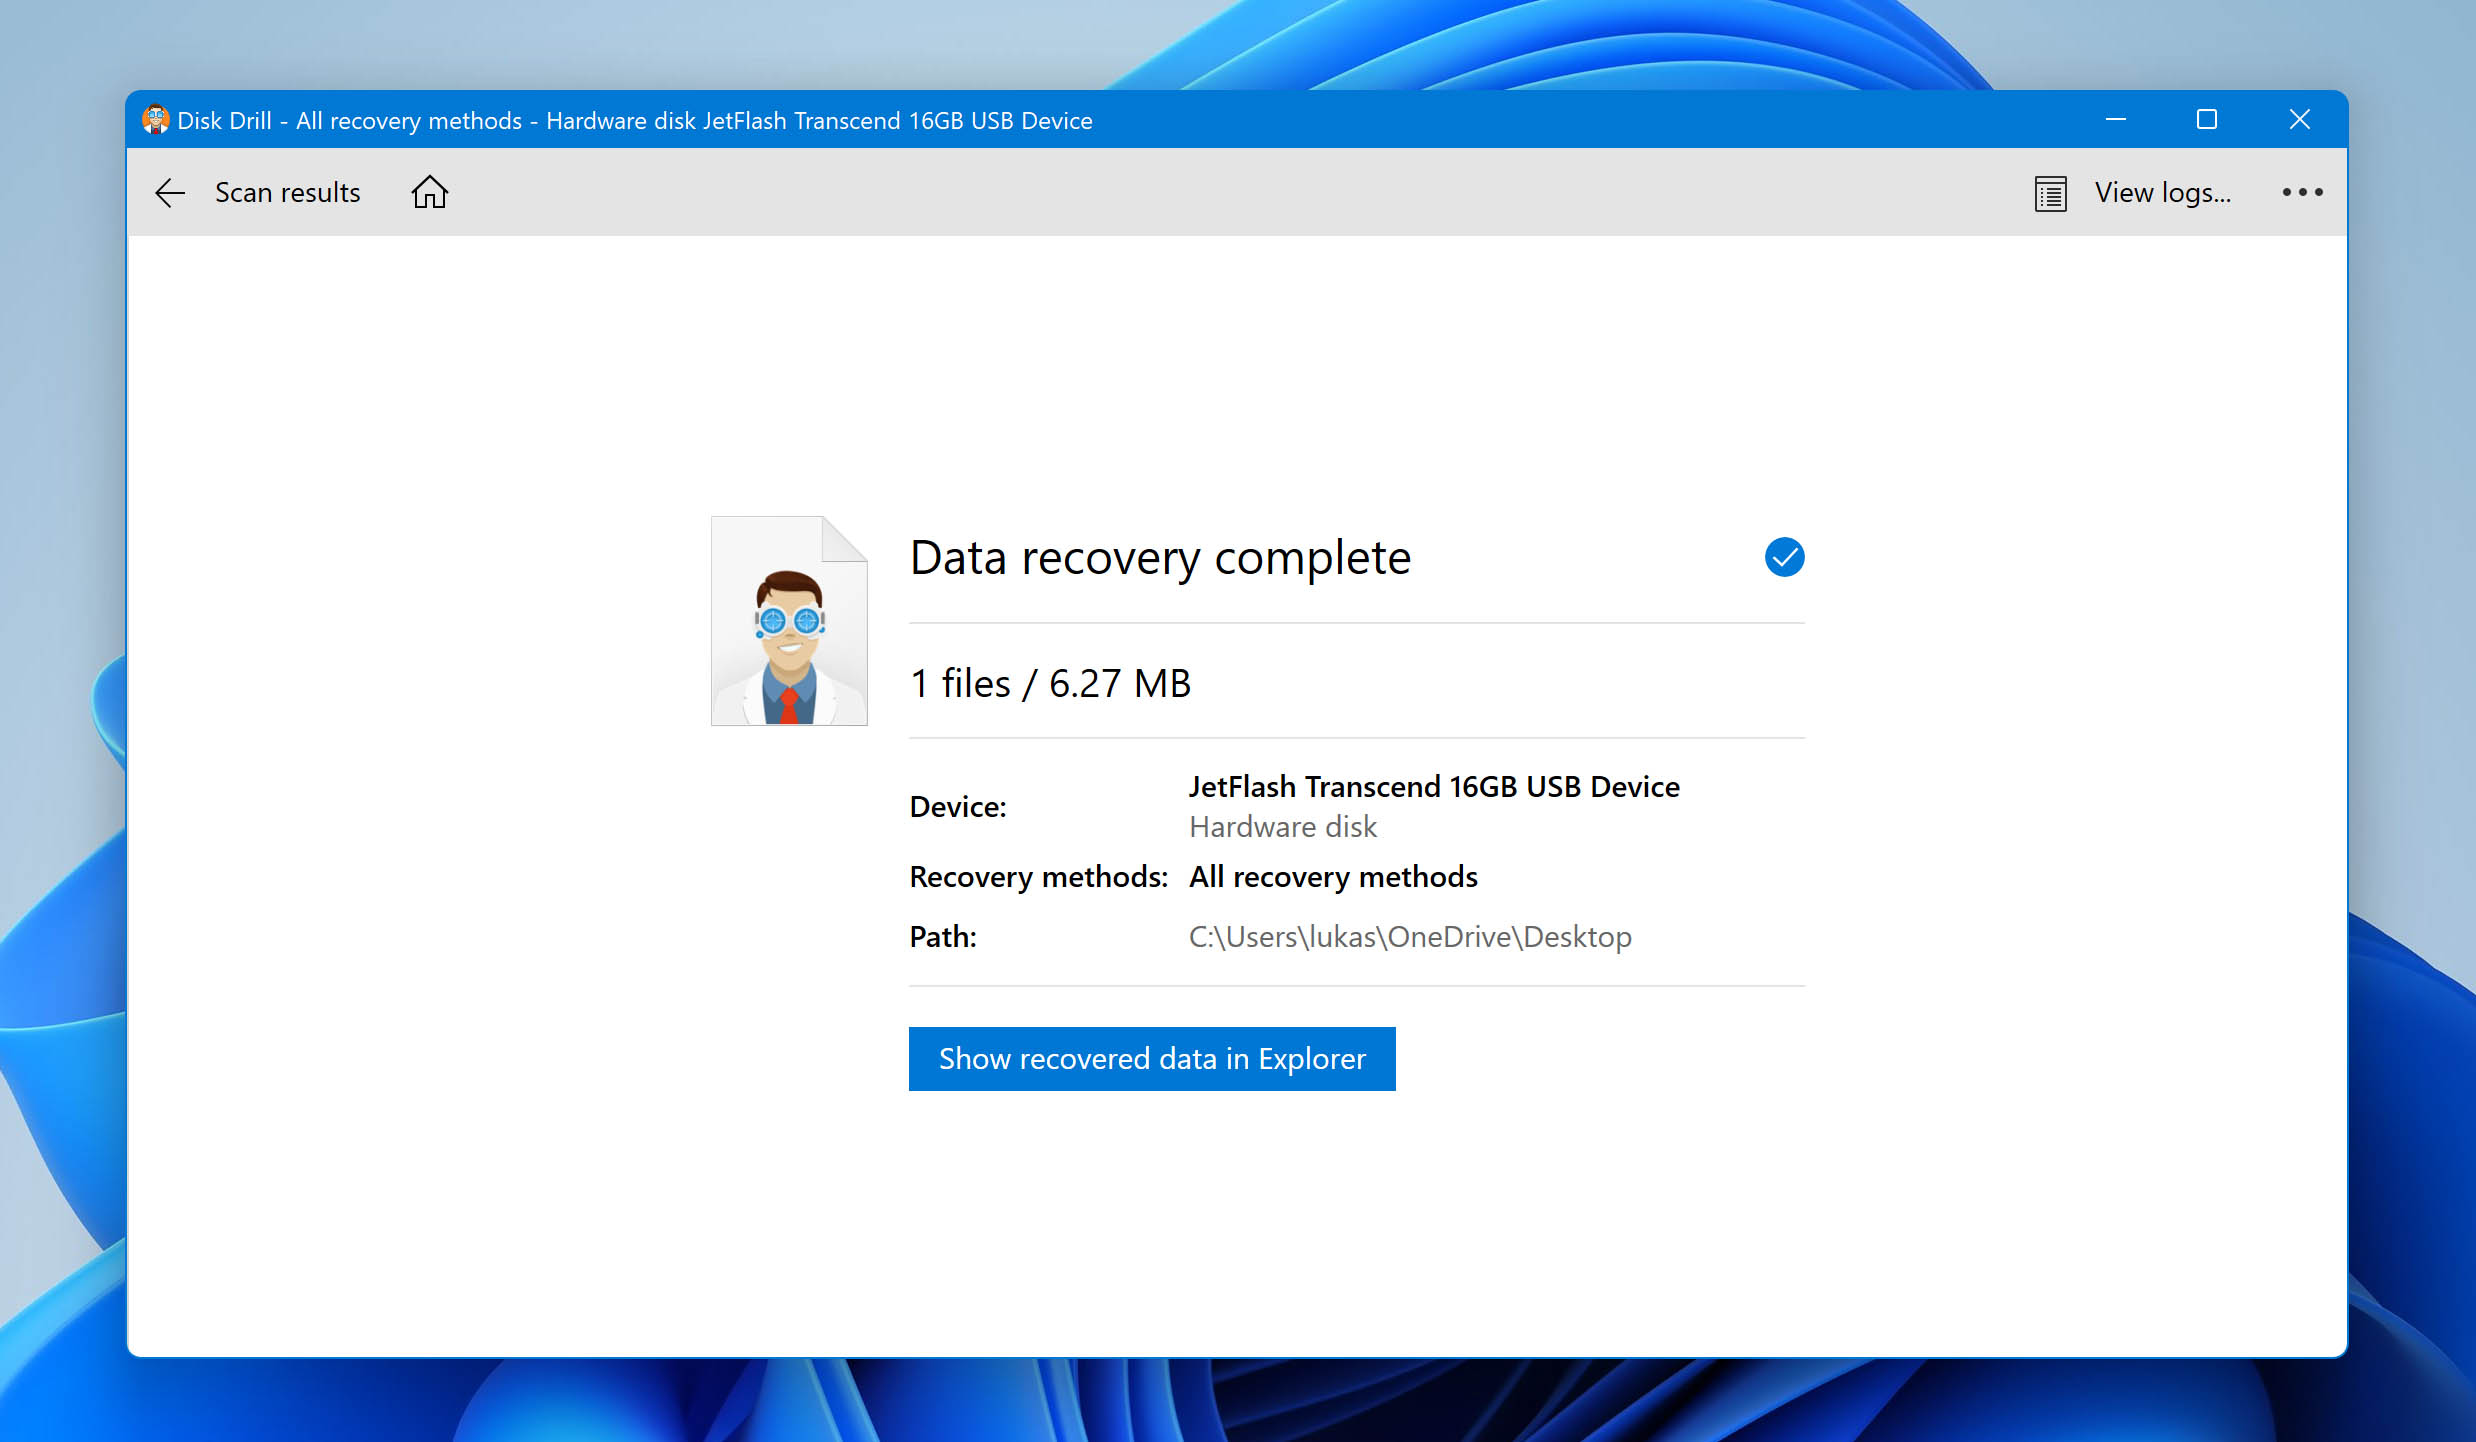 Click Show recovered data in Explorer